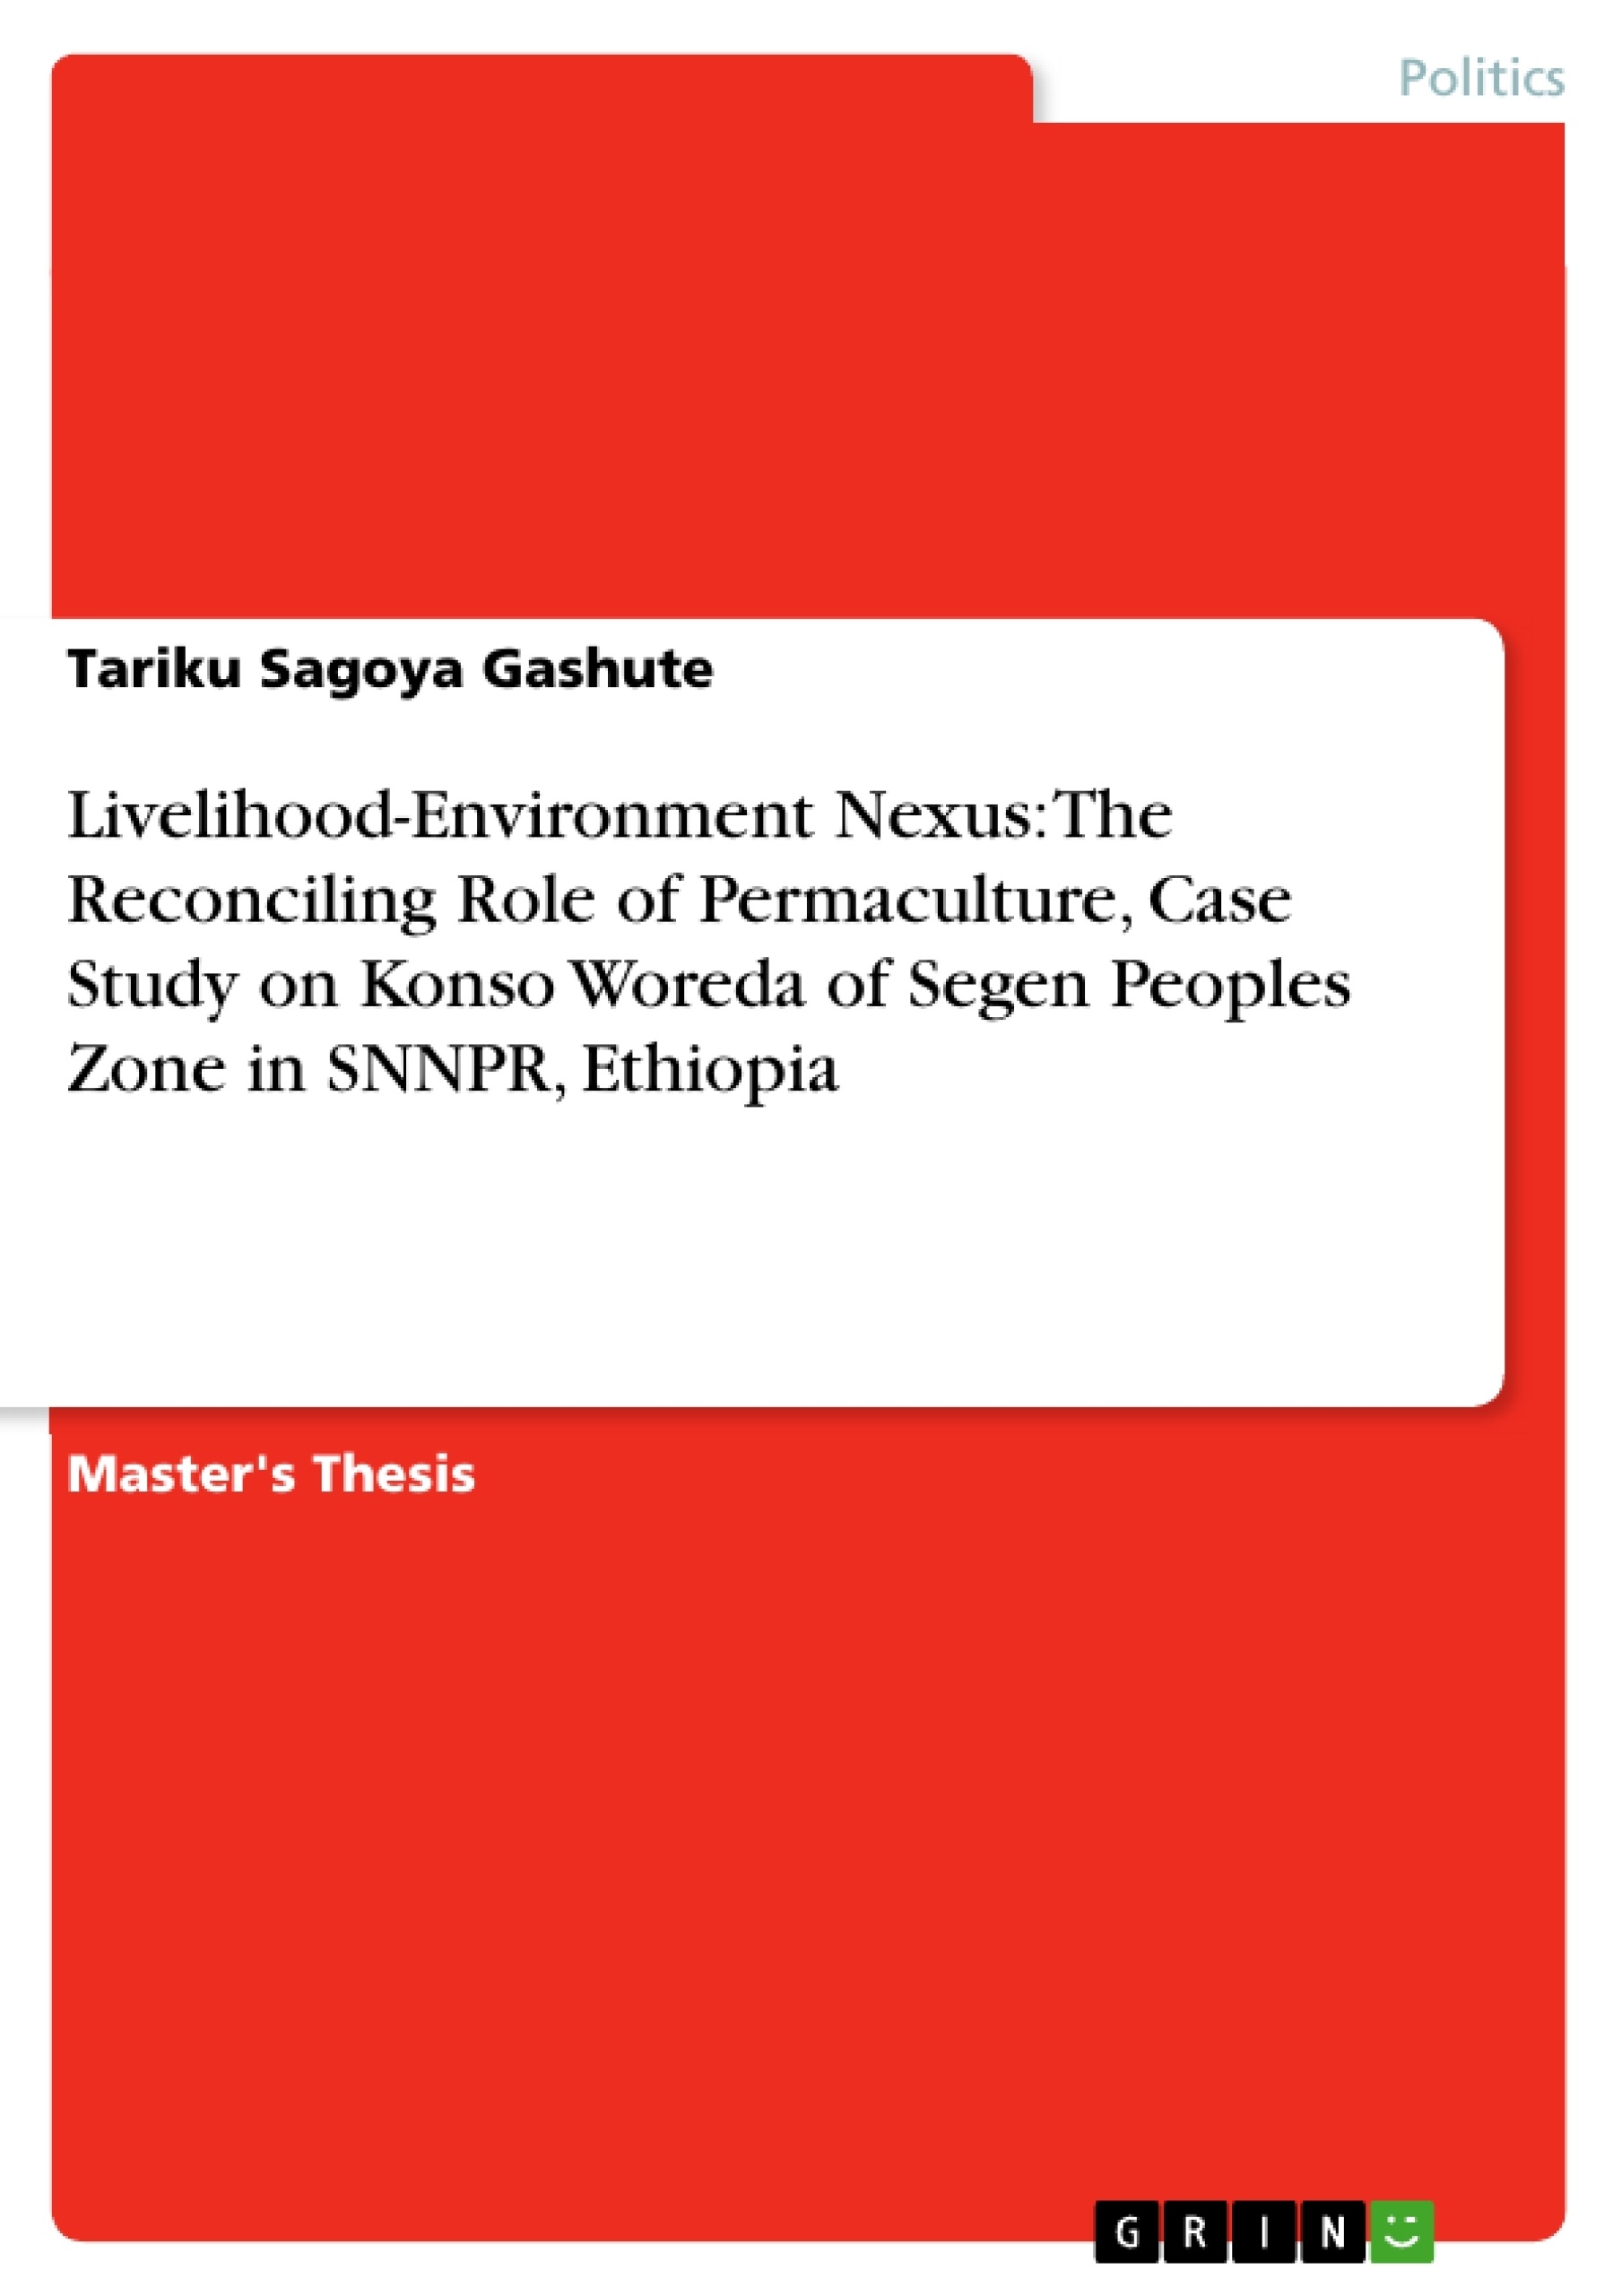 Title: Livelihood-Environment Nexus: The Reconciling Role of Permaculture, Case Study on Konso Woreda of Segen Peoples Zone in SNNPR, Ethiopia